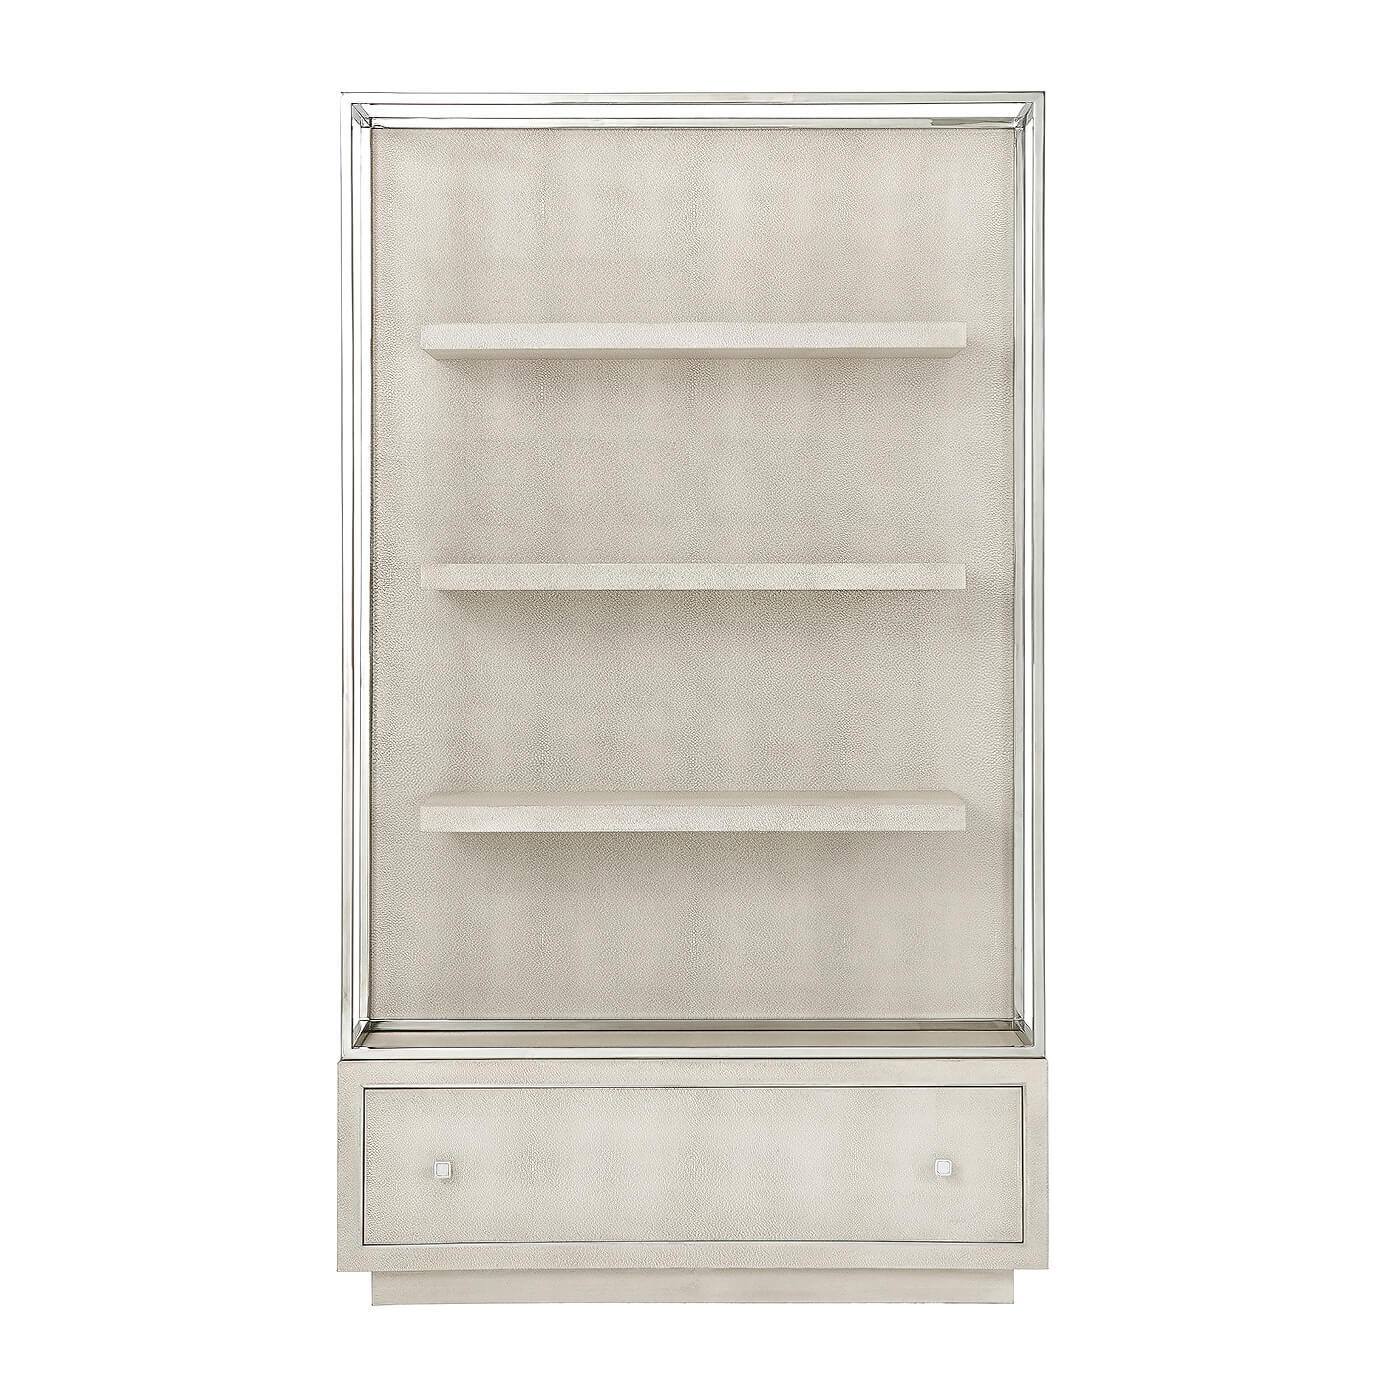 A modern bookcase with a polished nickel frame and covered in a light shagreen embossed leather wrap, with floating shelves and a large bottom drawer also with polished nickel hardware and moldings.
Dimensions: 48